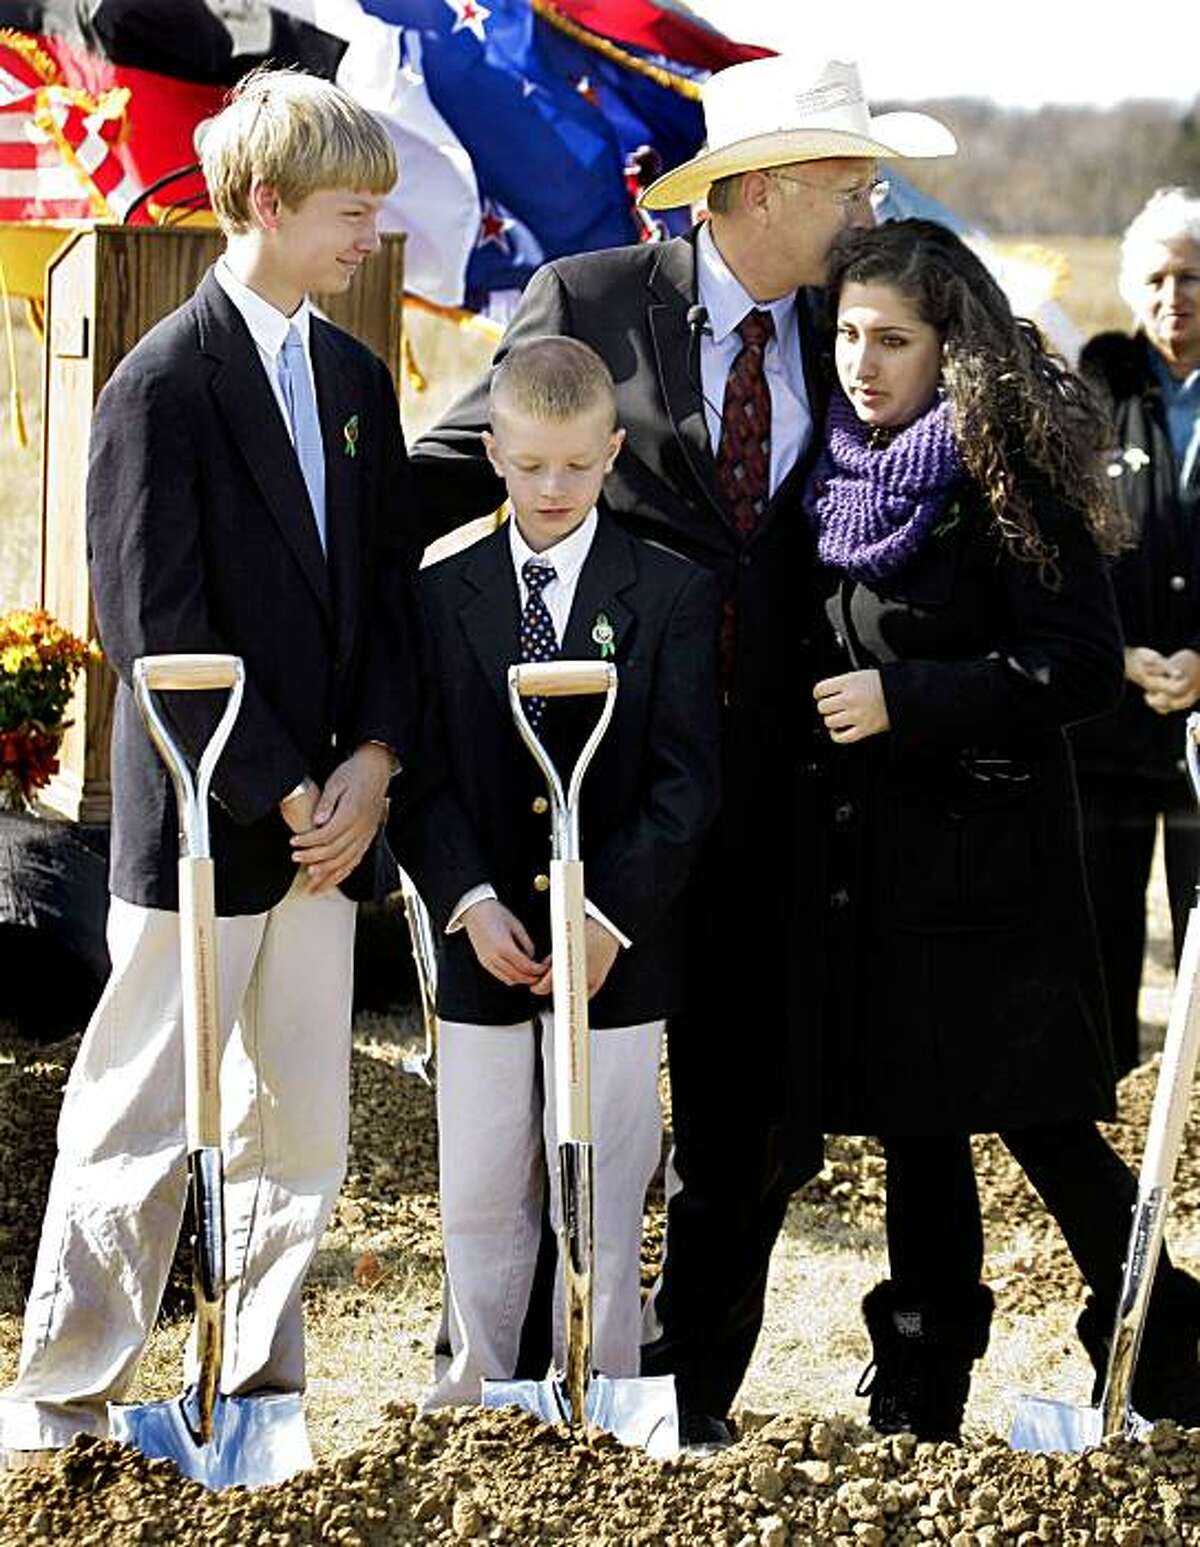 Secretary of the Interior Ken Salazar, rear, embraces Sarah Wainio, sister of Flight 93 passenger Honor Elizabeth Wainio, right, with Campbell Peterson, left, and Peyton Peterson, grandsons of Flight 93 passengers Donald Peterson and Jean Hoadley Peterson, after taking part in the ground breaking for the Flight 93 National Memorial Saturday, Nov. 7, 2009 in Shanksville, Pa.. Plans are to dedicate the memorial on Sept. 11, 2011. (AP Photo/Gene J. Puskar)